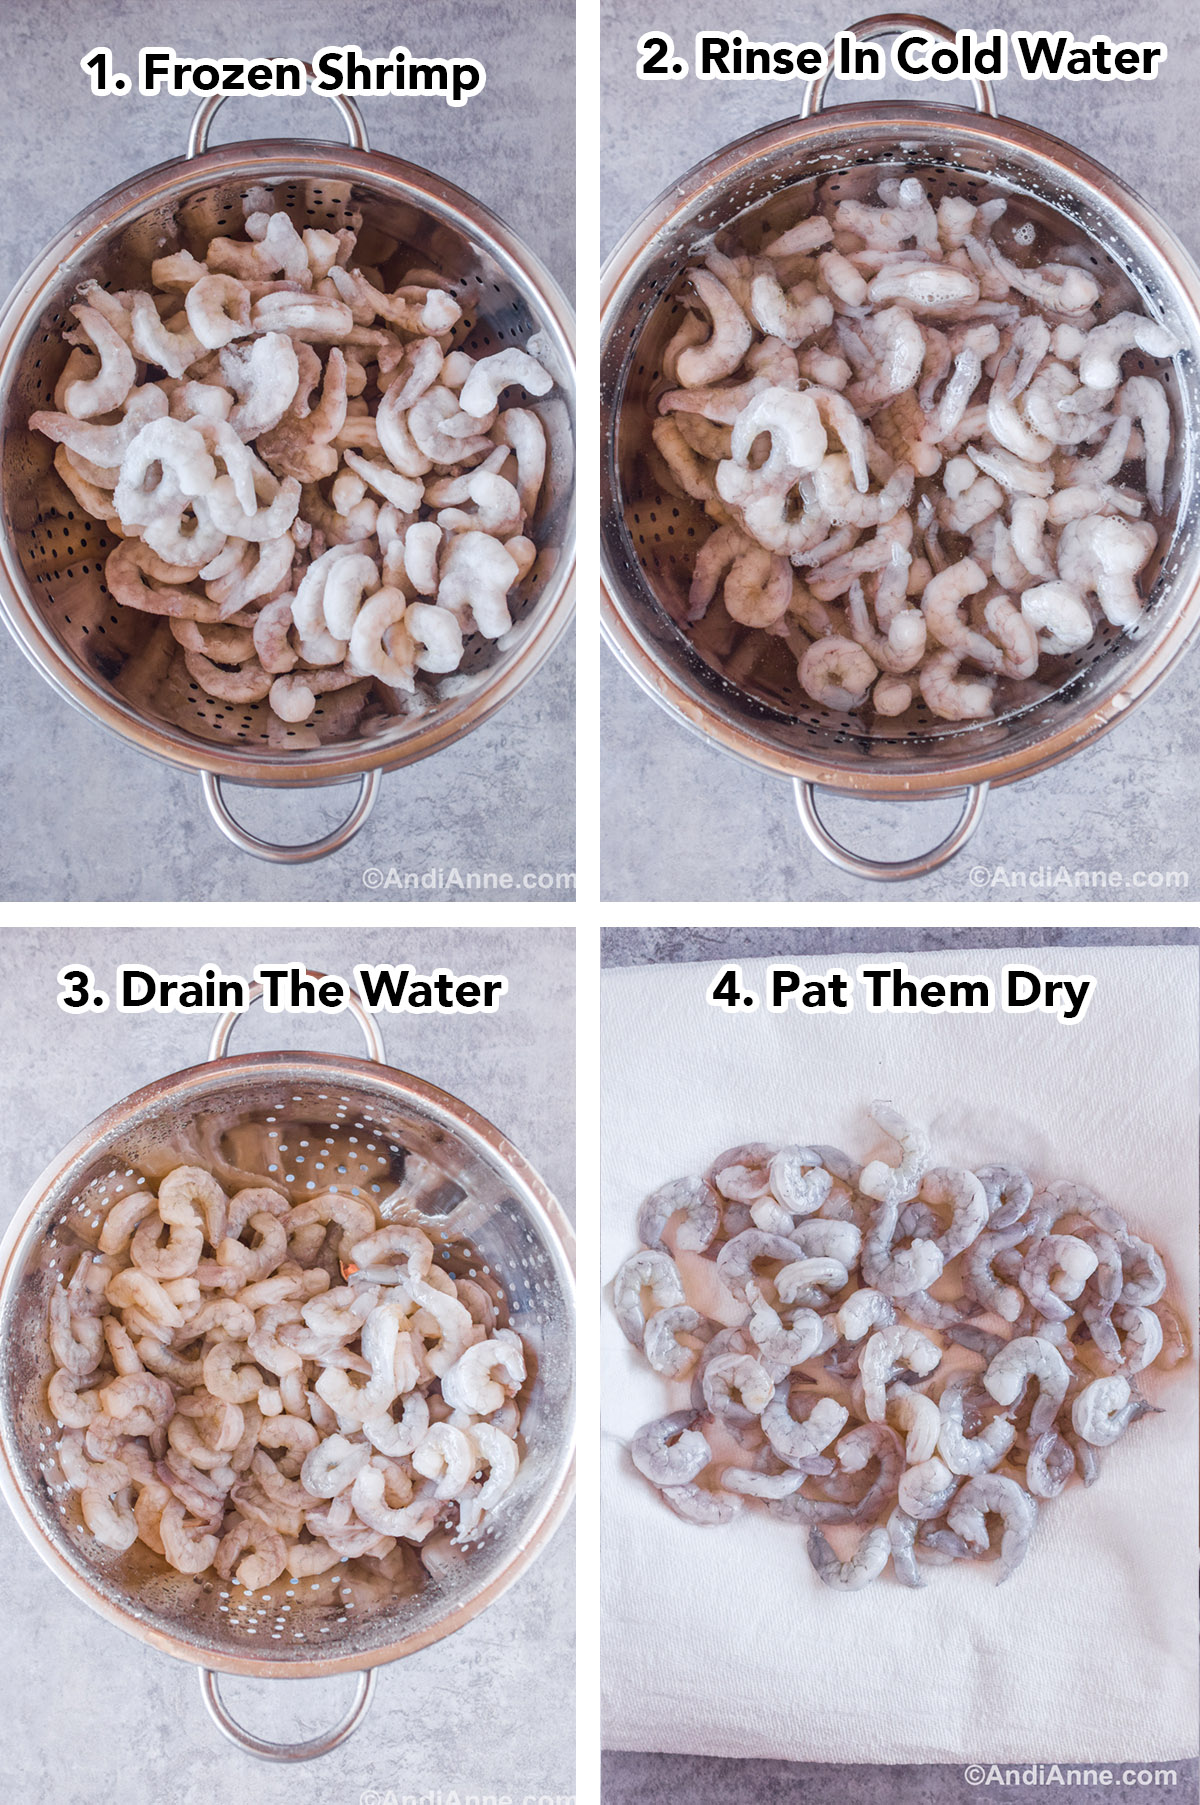 Four images showing steps to thaw shrimp. First image is a strainer with 1 lb of raw shelled shrimp. Second is shrimp soaking in water. Third is thawed shrimp in a strainer. Fourth is thawed raw shrimp piled on paper towel. Steps say 1 frozen shrimp, 2 rinse in cold water, 3 drain the water, 4 pat them dry.